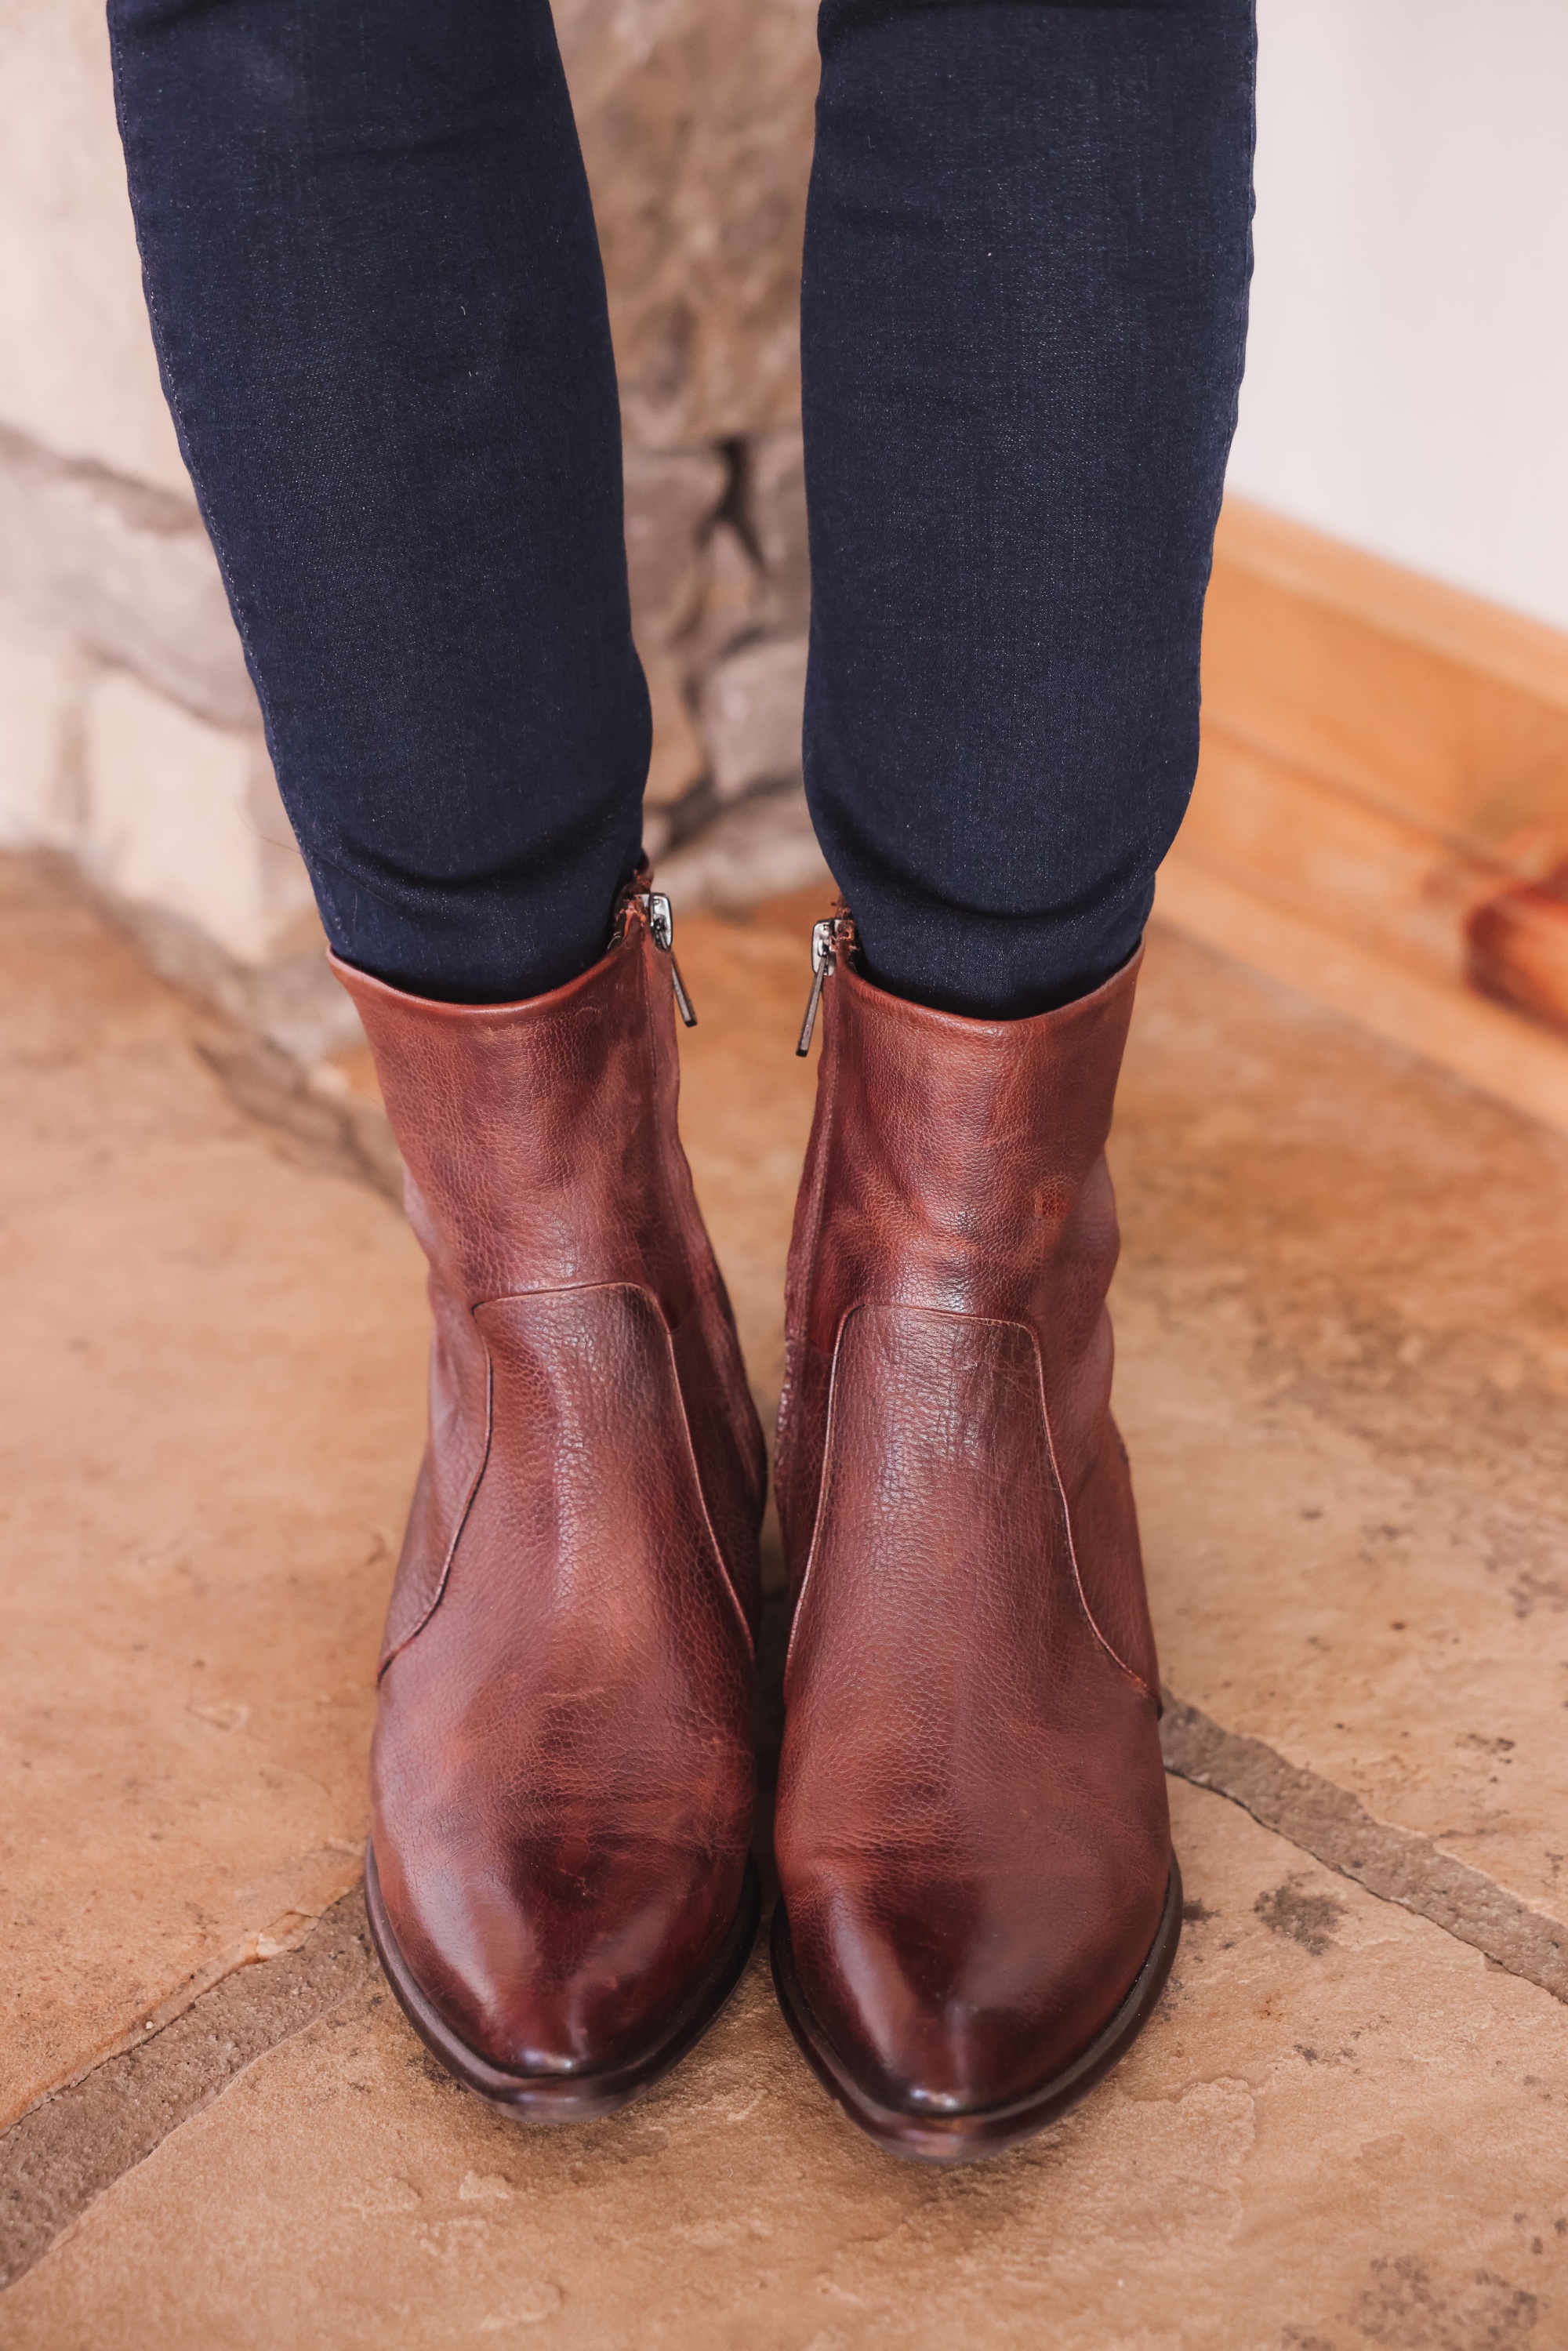 Best brown booties, Erin Busbee of Busbee wearing an ASTR the Label sculptural sleeve sweater with rag & bone skinny jeans and brown sam edelman hilary booties from Nordstrom in Telluride, Colorado